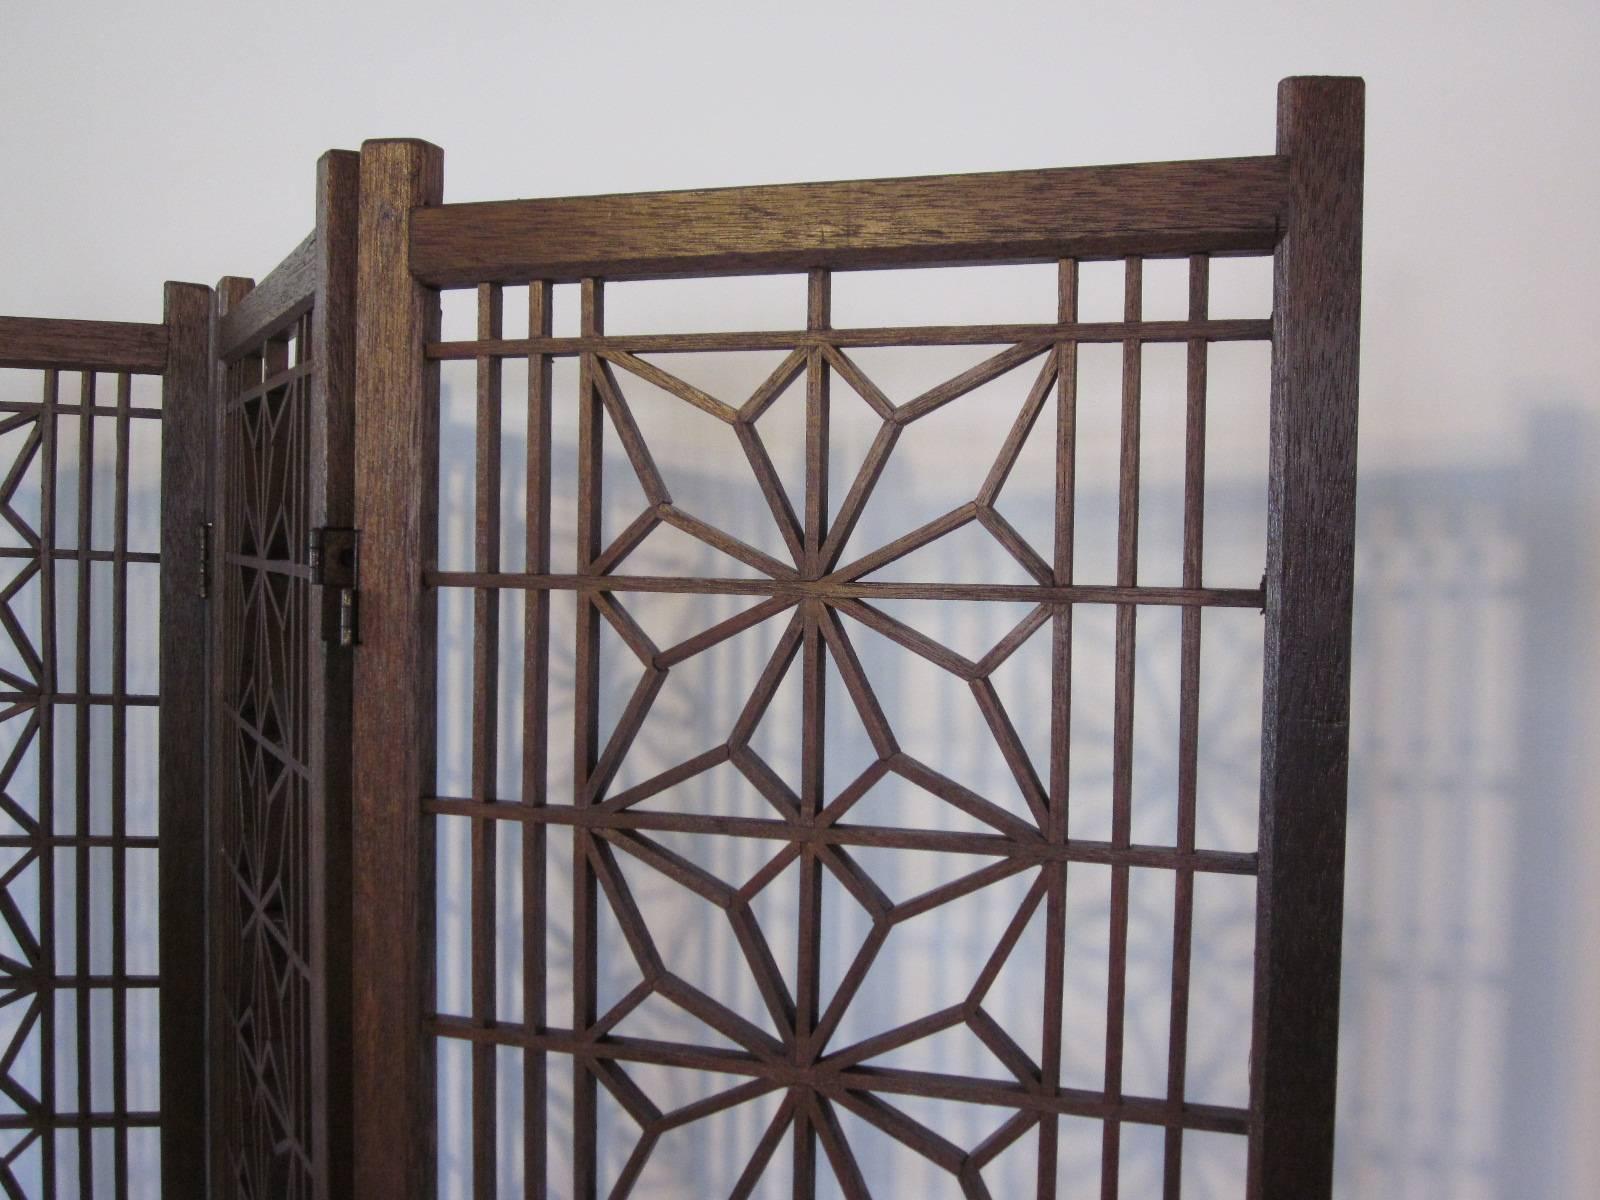 A four-panel room divider with a single piece geometric constructed wood design and lower woven wood bottom section.